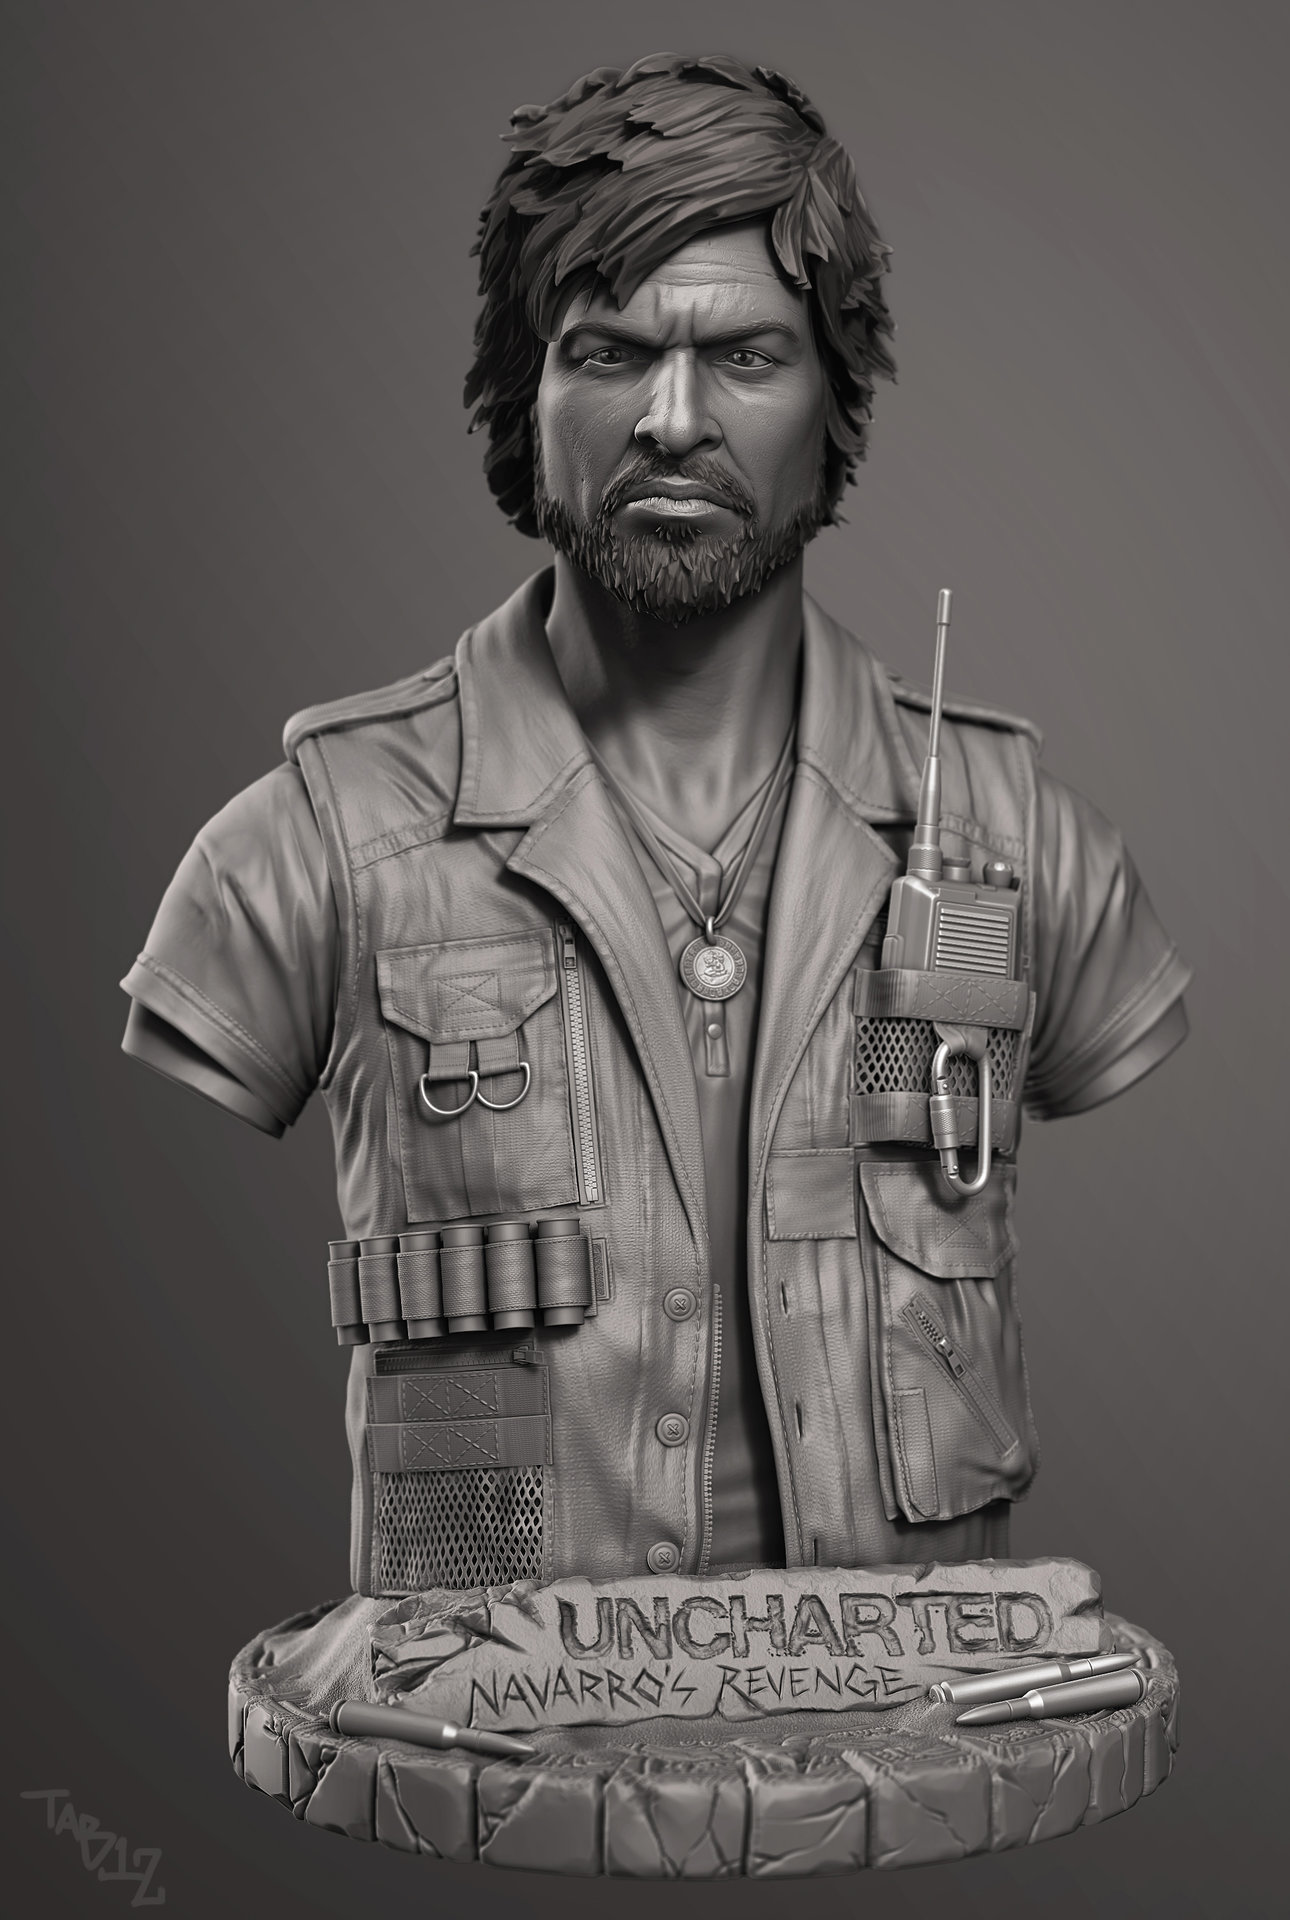 My rendition of Atoq Navarro from Uncharted.